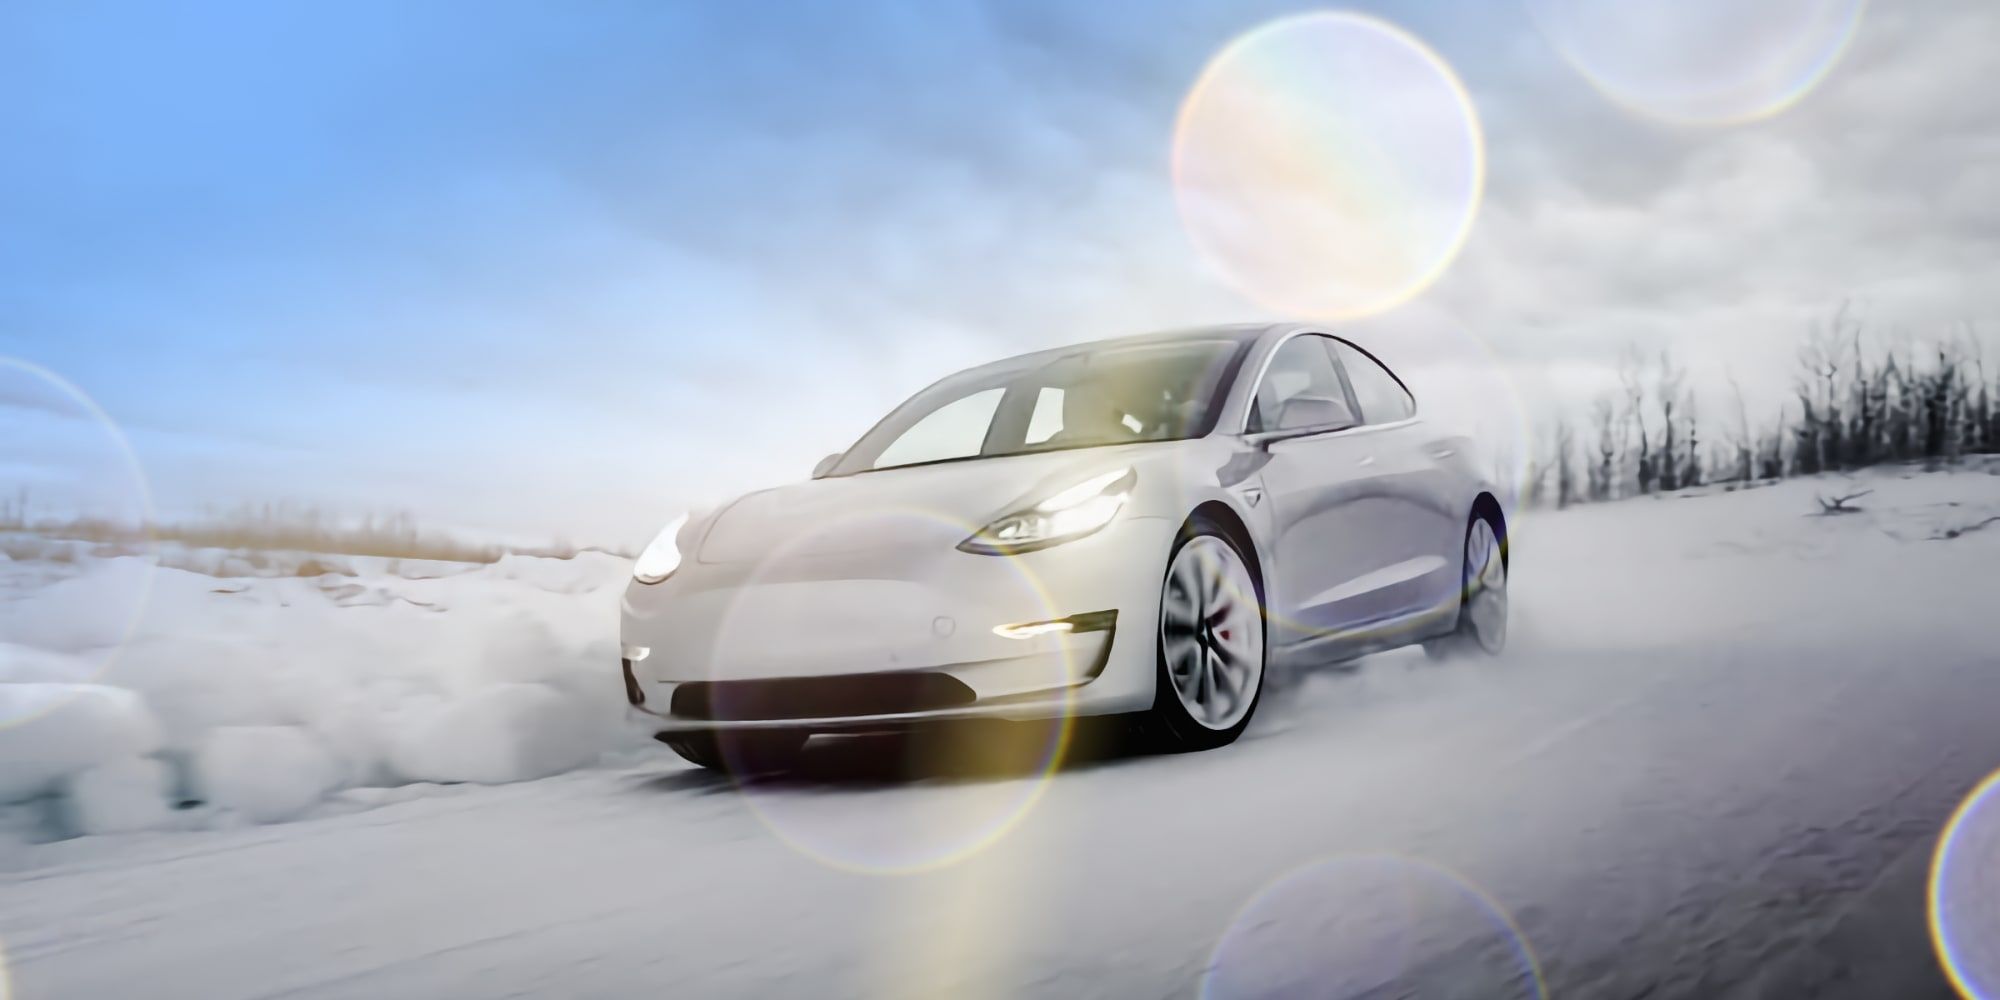 Tesla Model S Driving On Snowy Road Highway Winter Cold